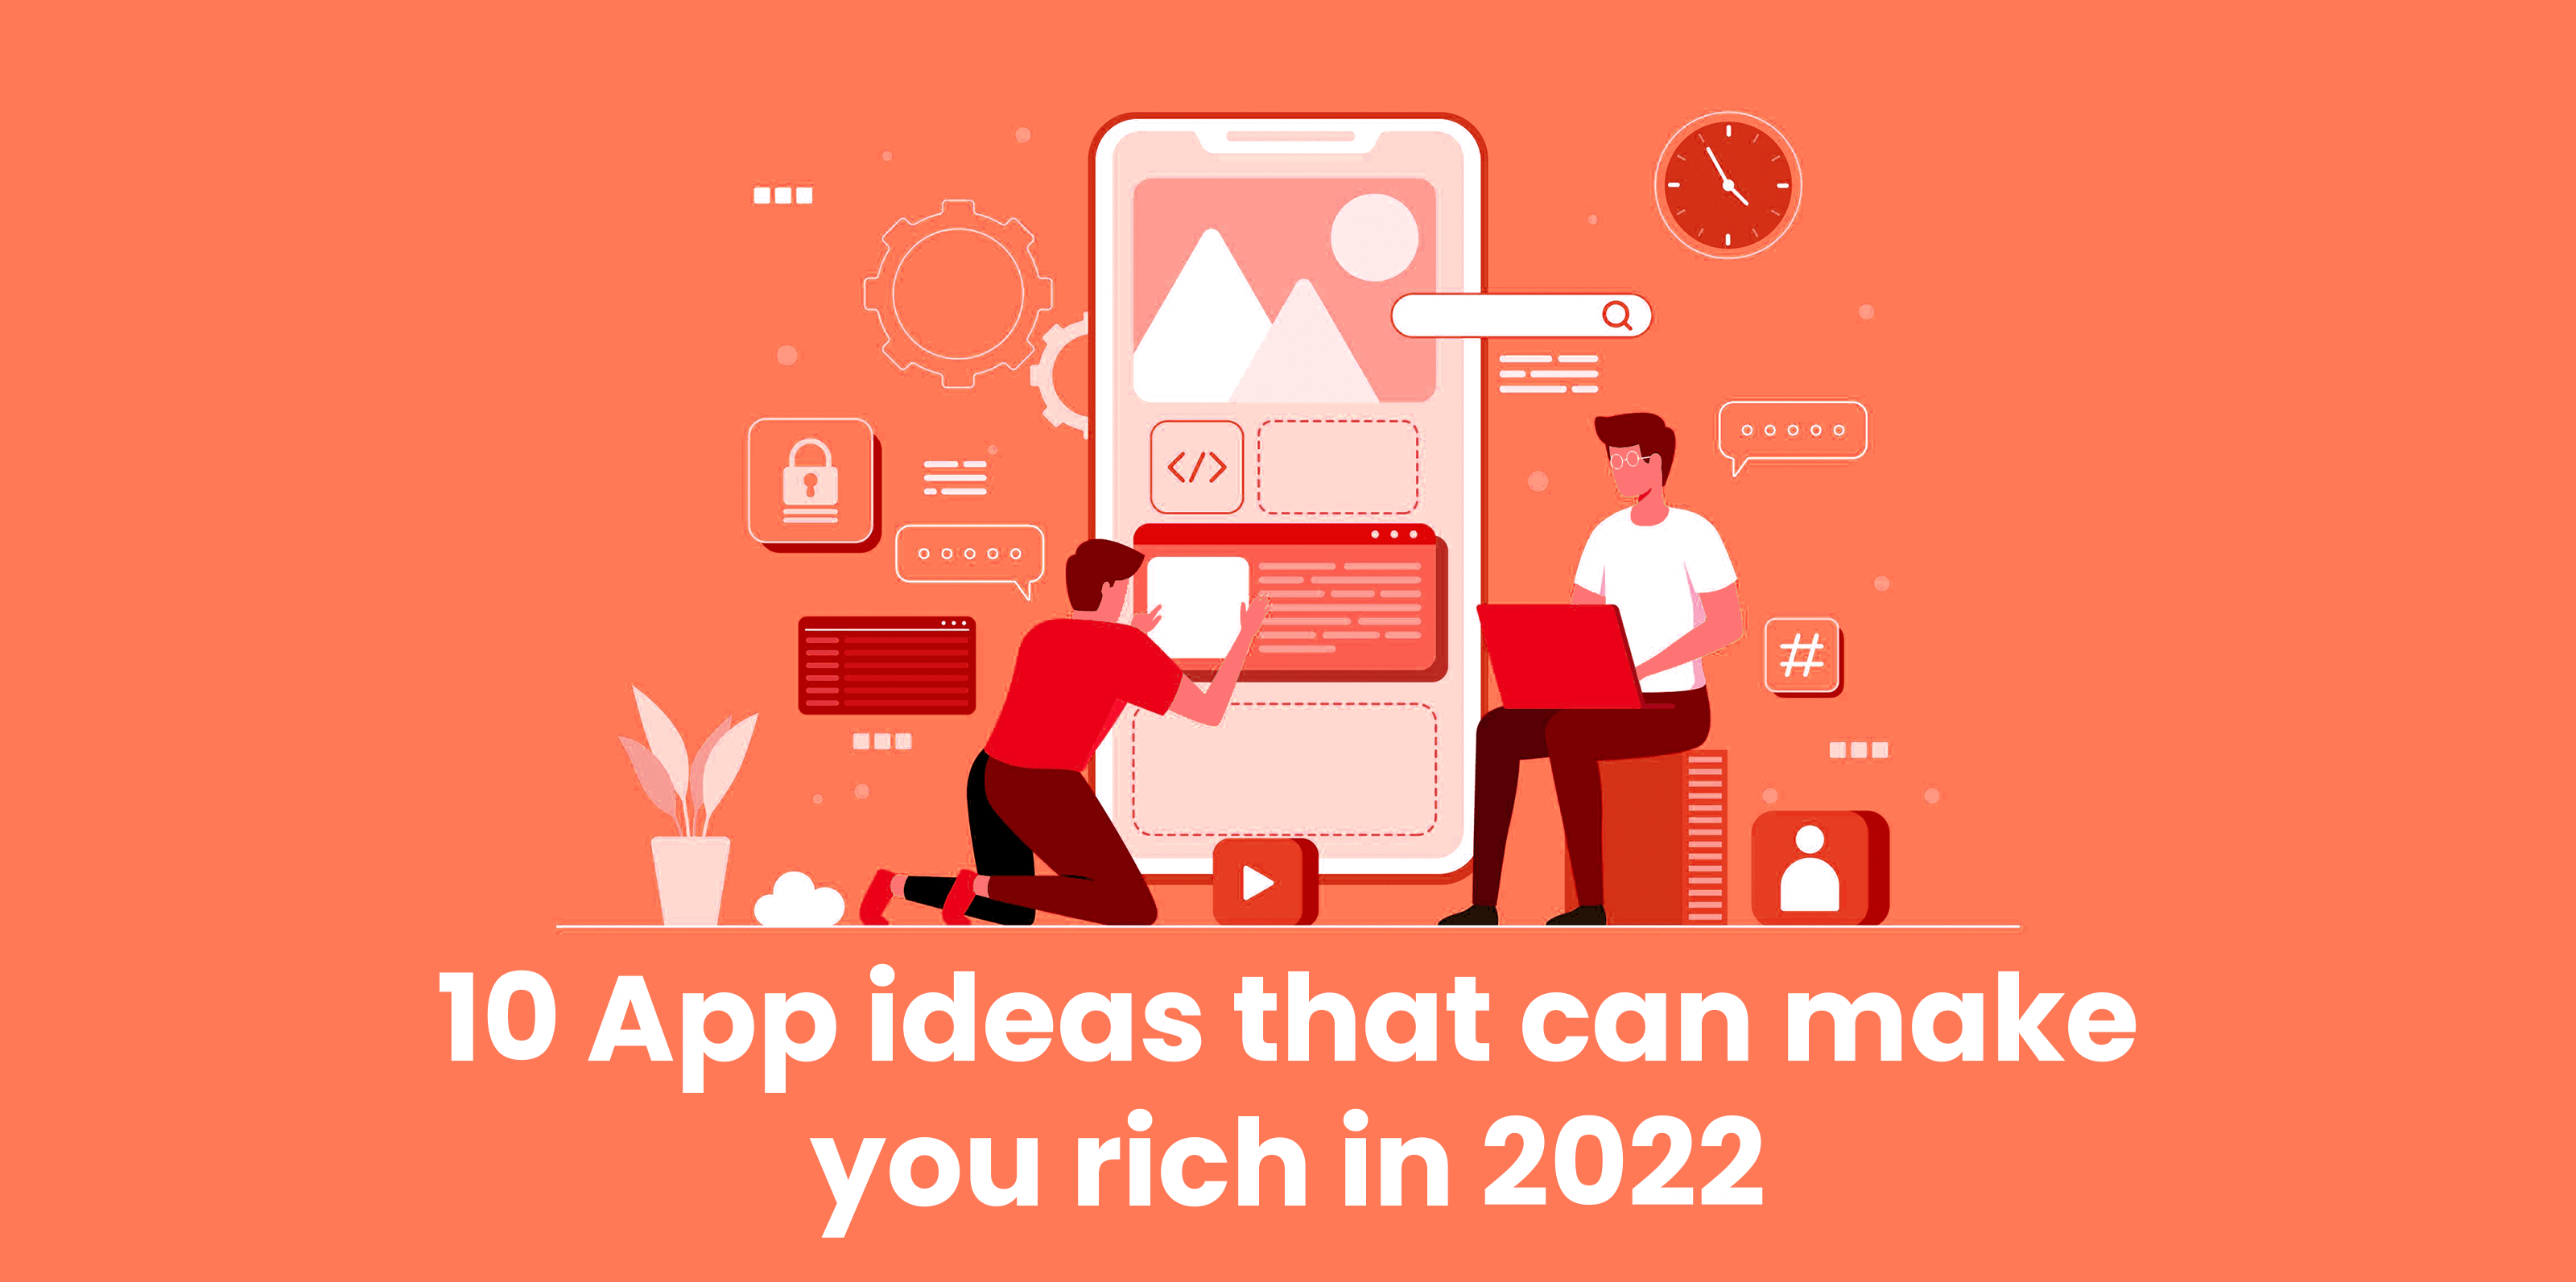 10-App-ideas-that-can-make-you-rich-in-2022